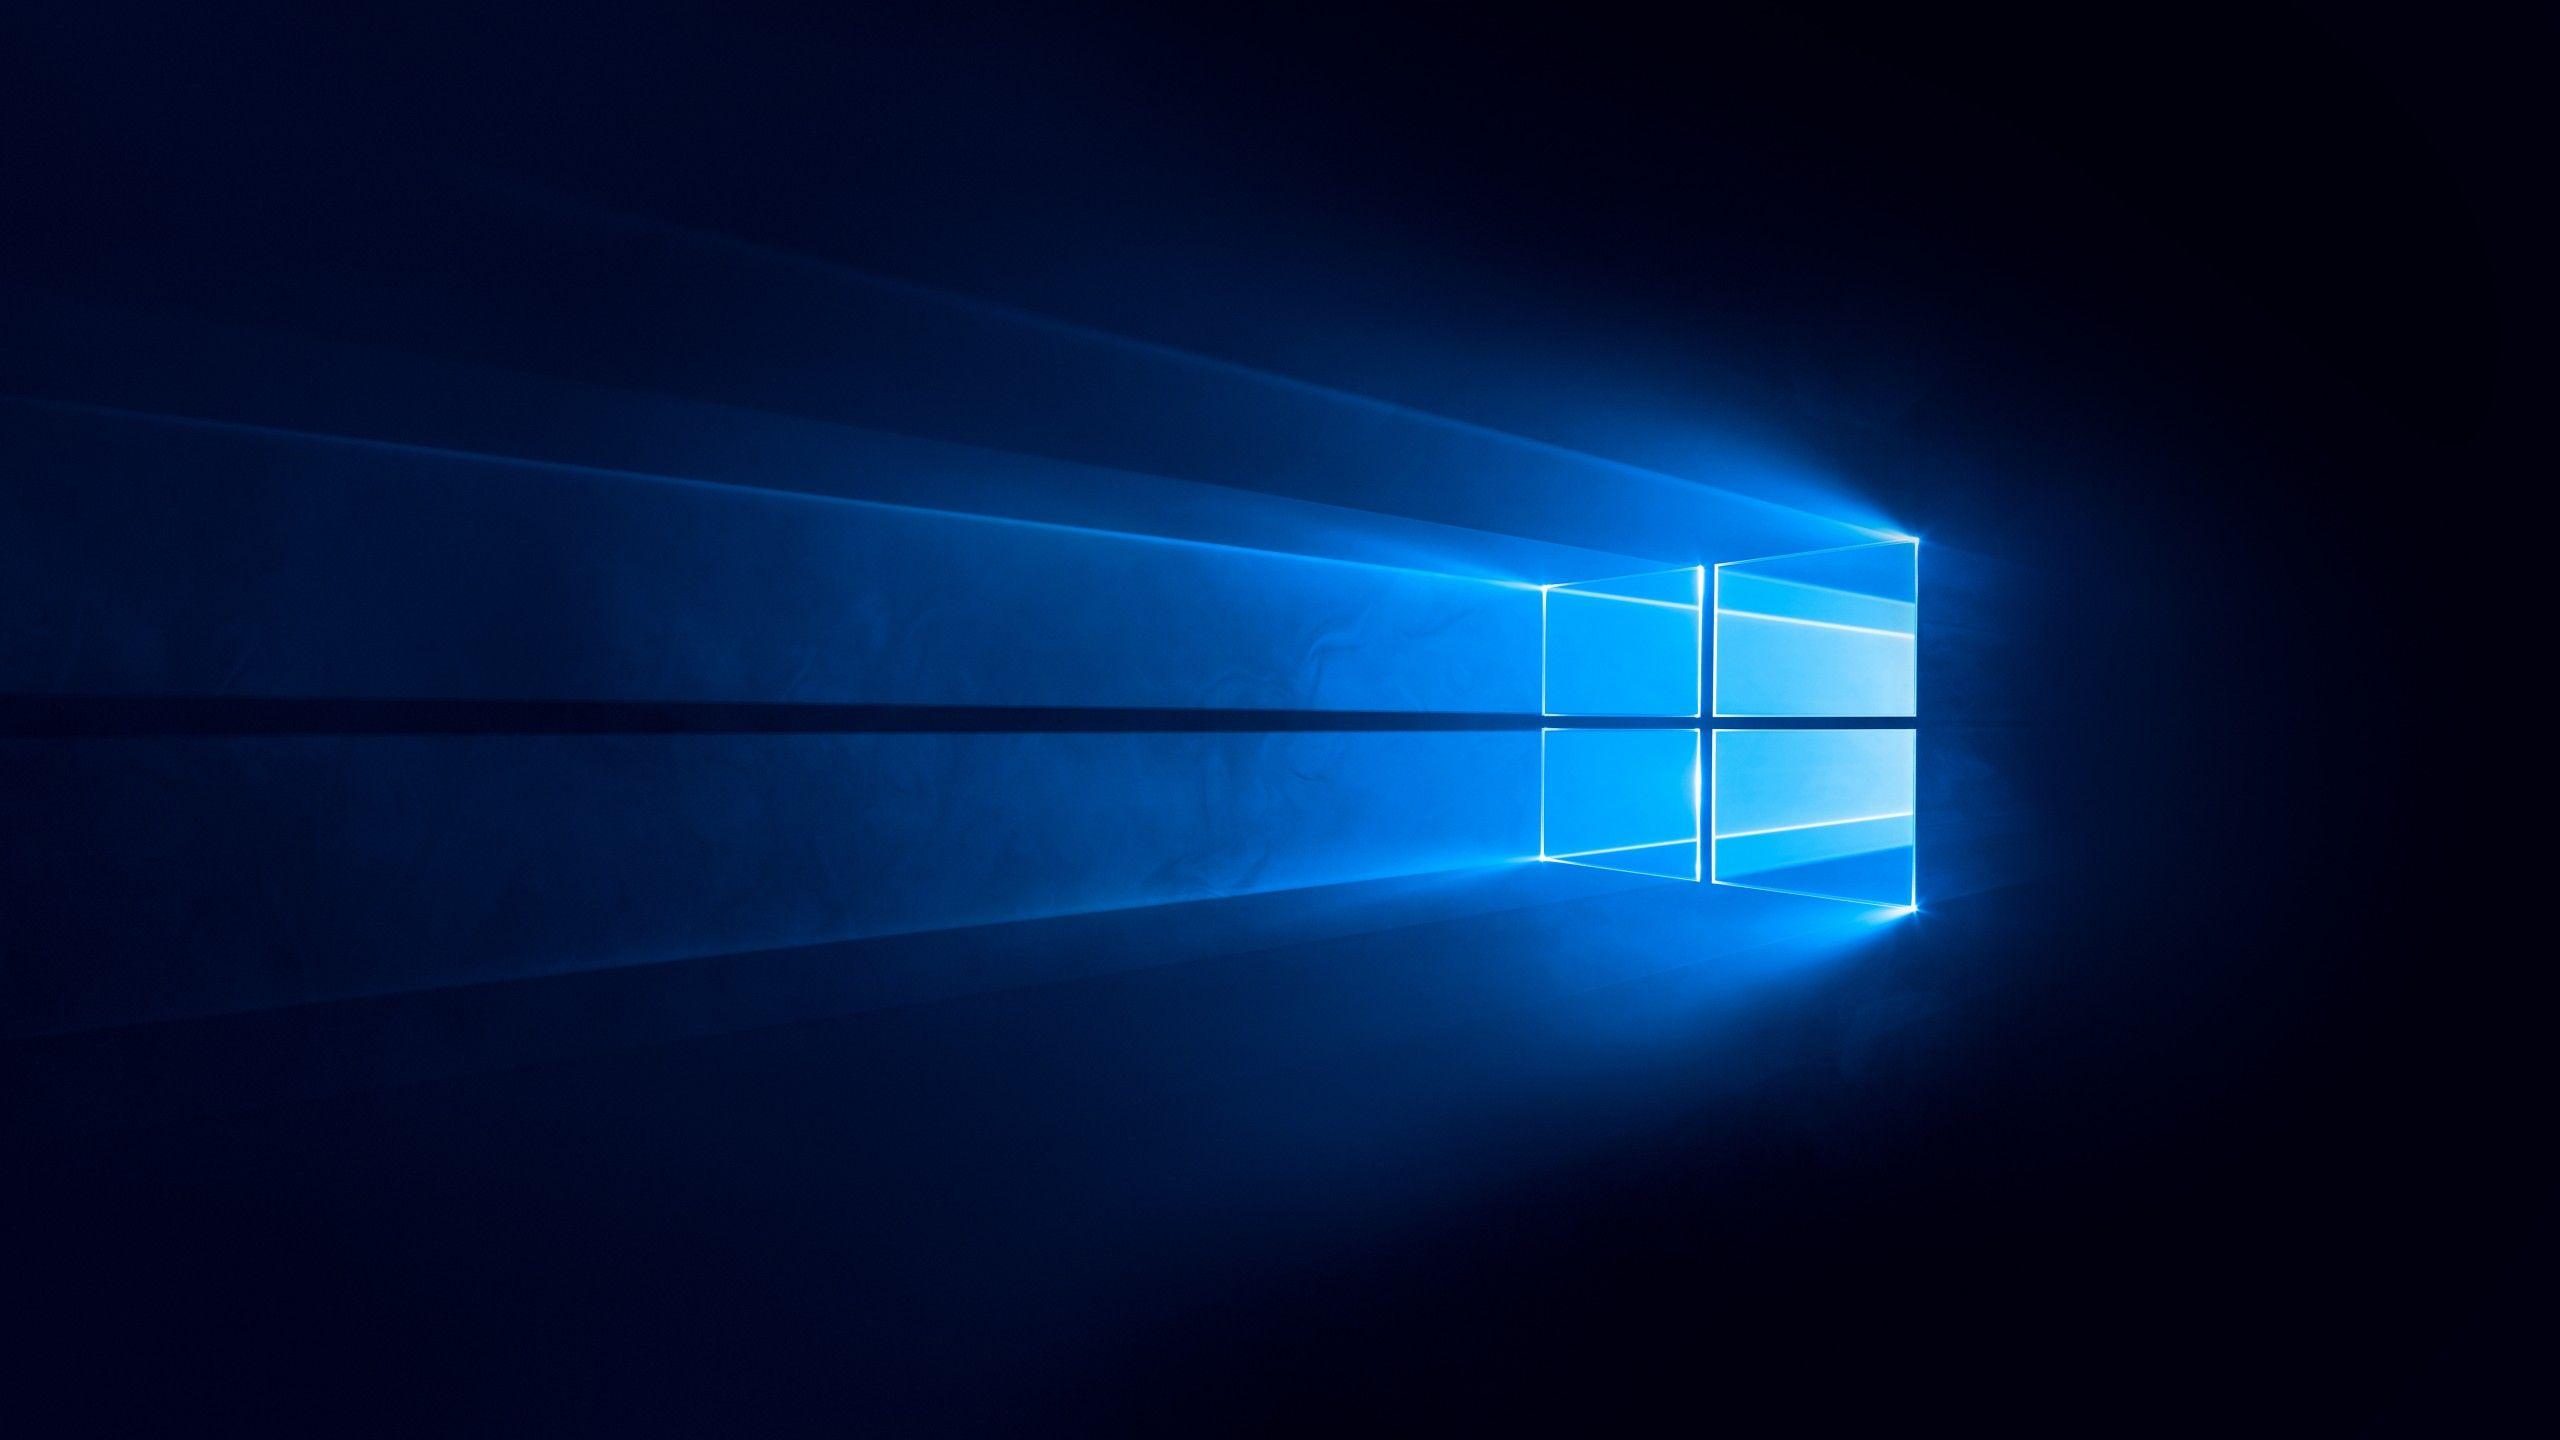 Download Vintage Windows 10 Background in High Resolution, Royalty-Free